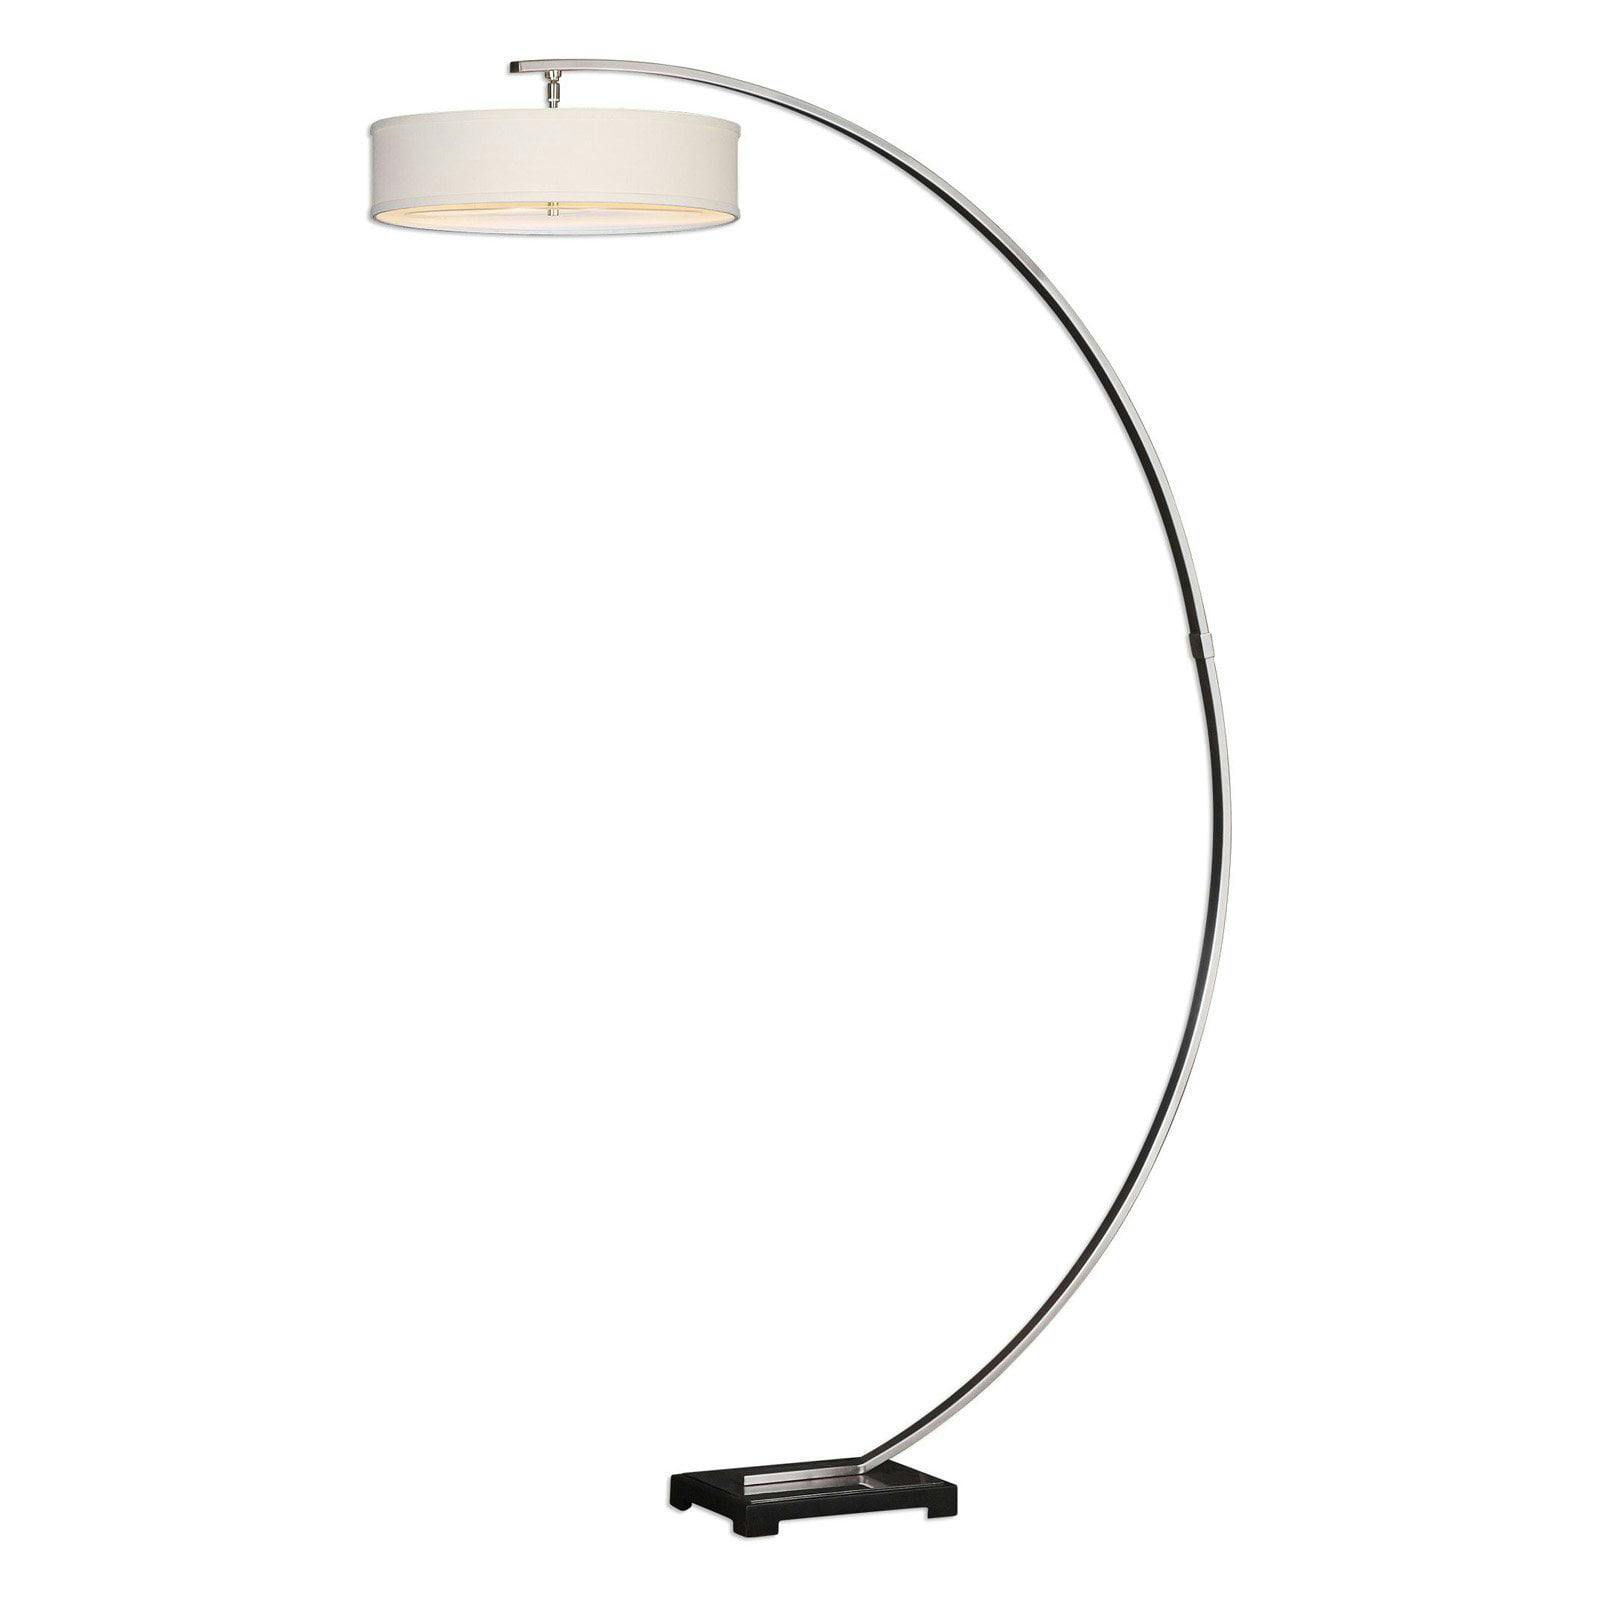 Arcadia Extreme Arc 2-Light Floor Lamp in Brushed Nickel with Matte Black Base